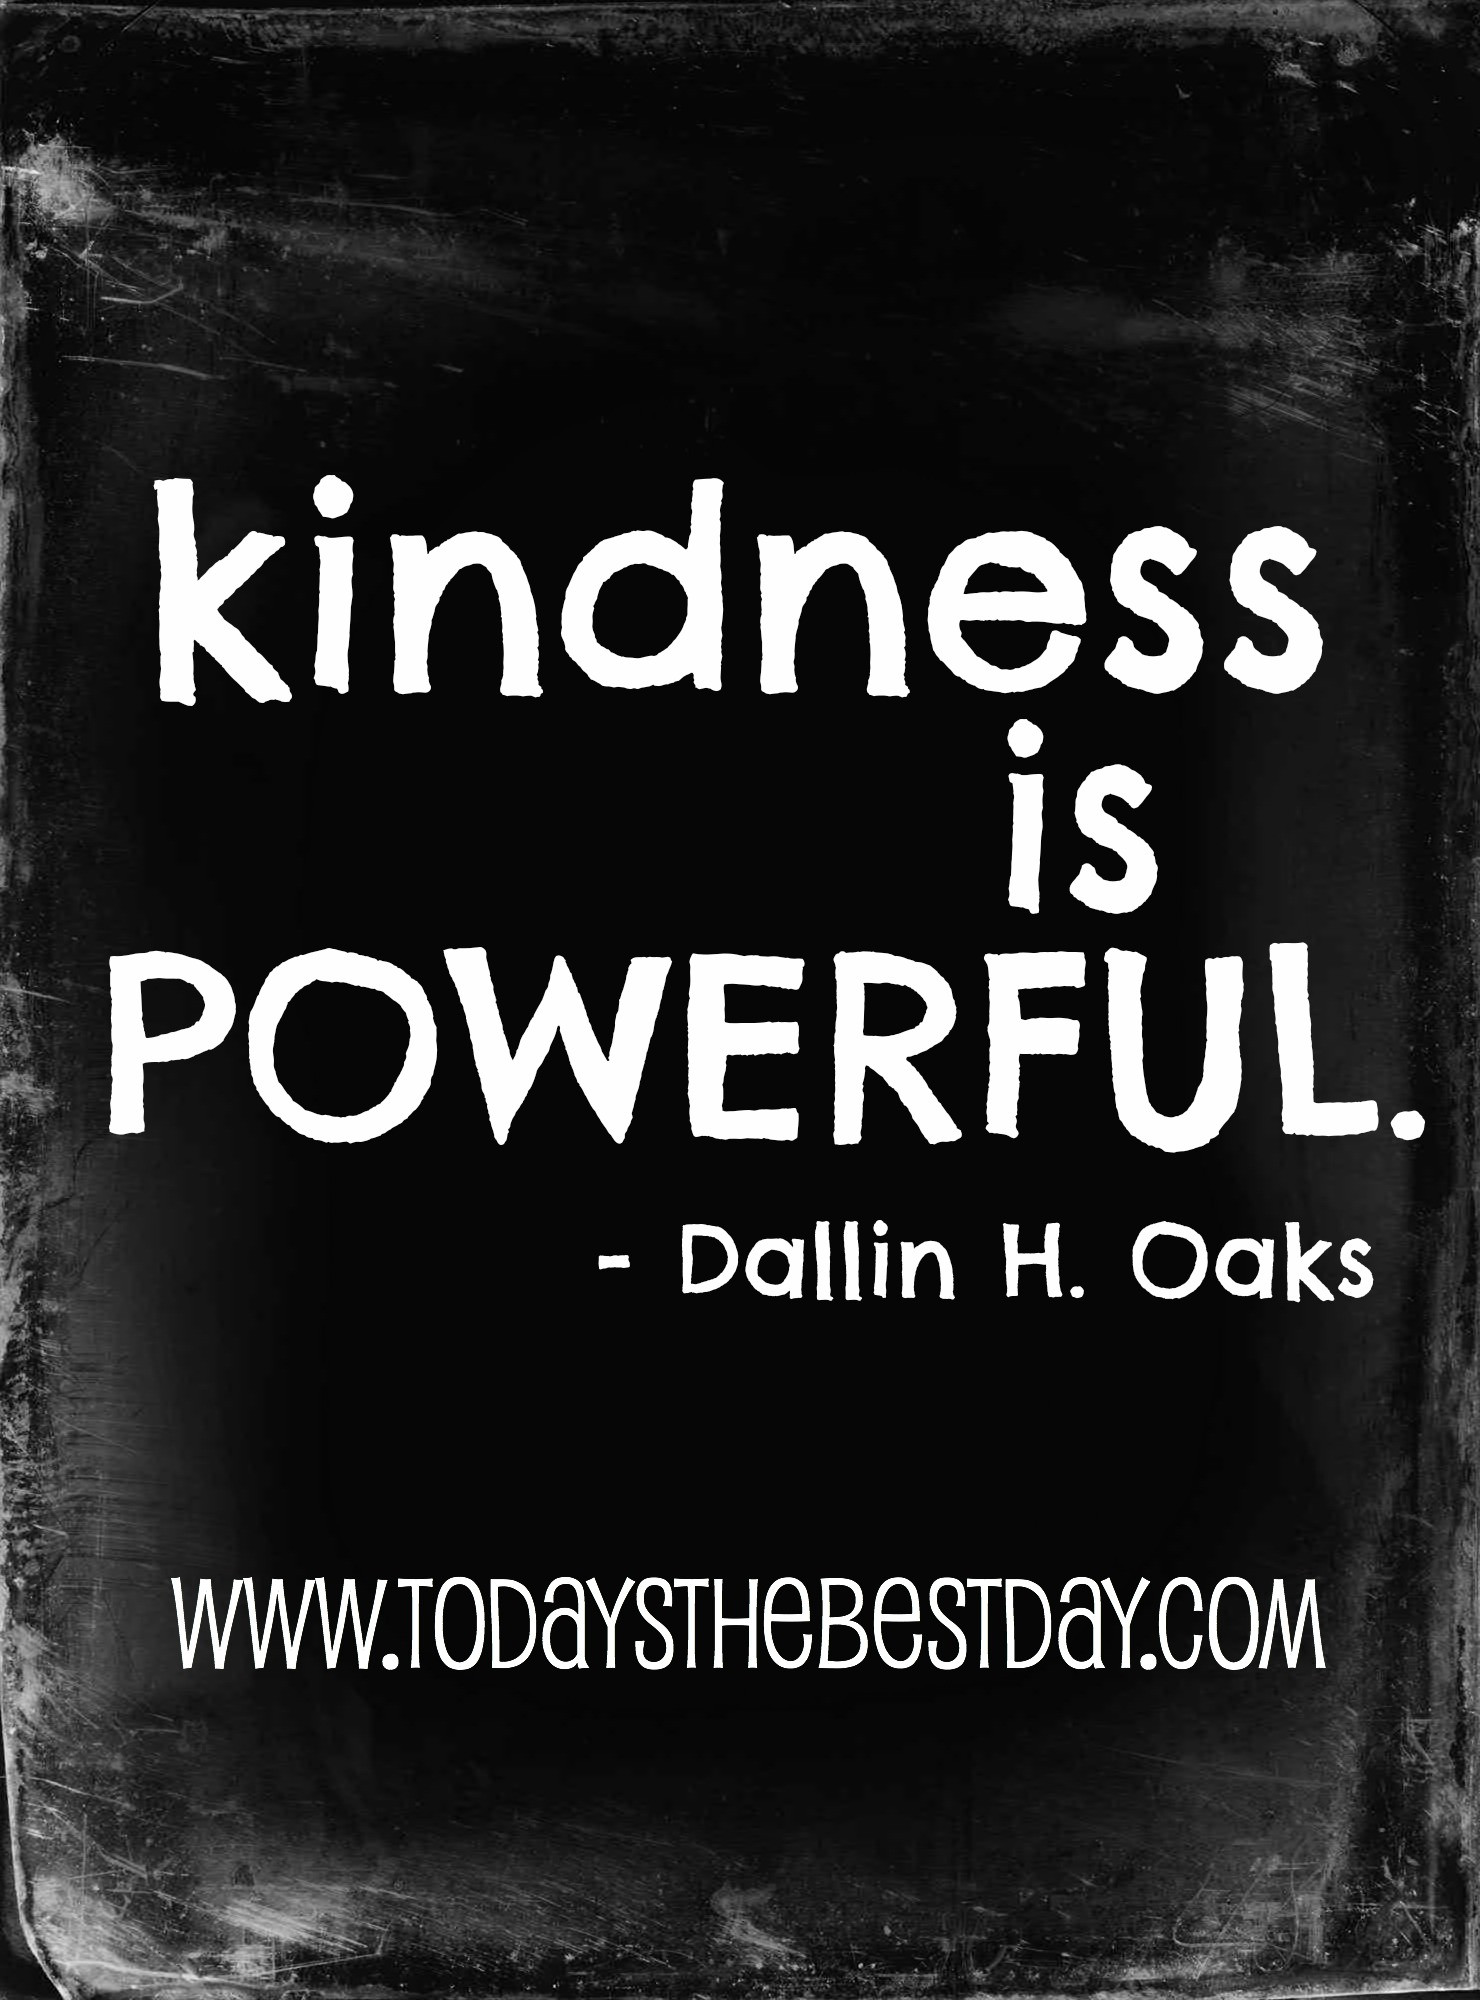 Lds Quotes On Kindness
 The Best of LDS General Conference 2014 Quotes Today s